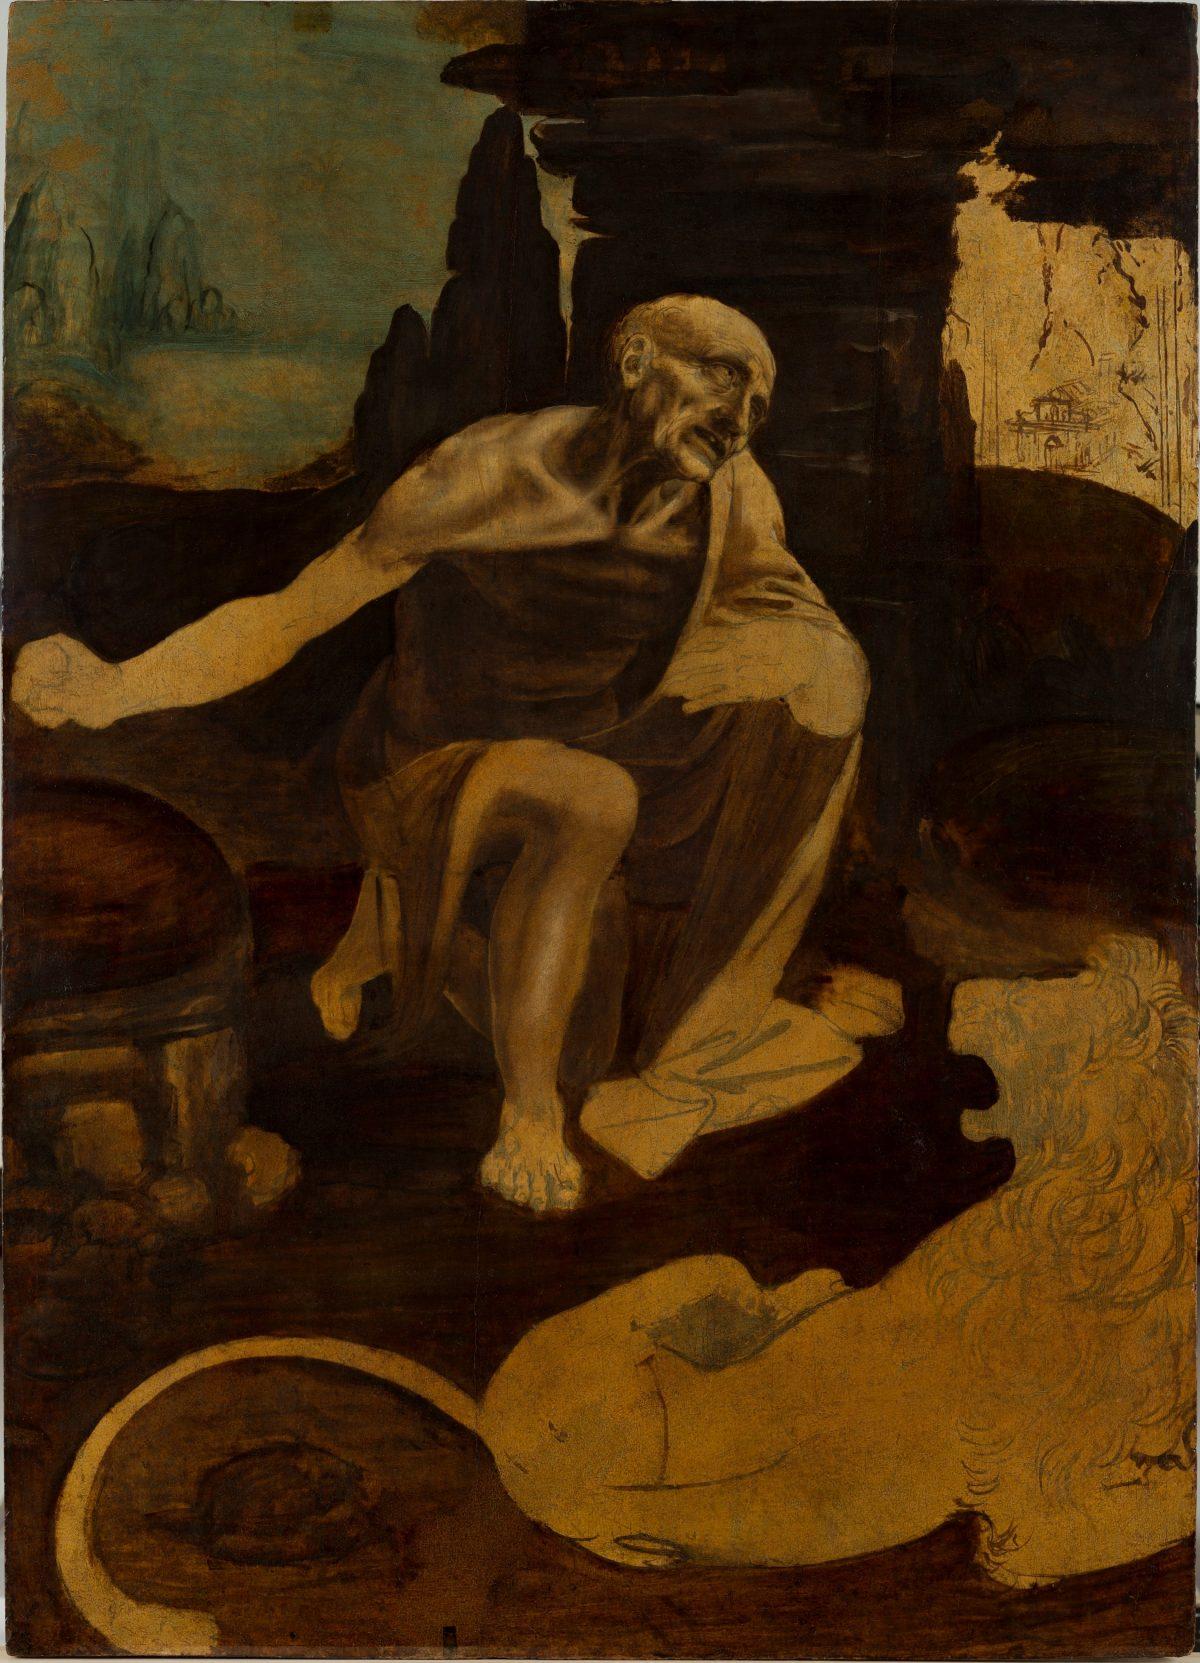 “Saint Jerome,” by Leonardo da Vinci. Tempera and oil on walnut paper, 41 inches by 30 inches. Vatican Museums, Rome. (The Metropolitan Museum of Art)